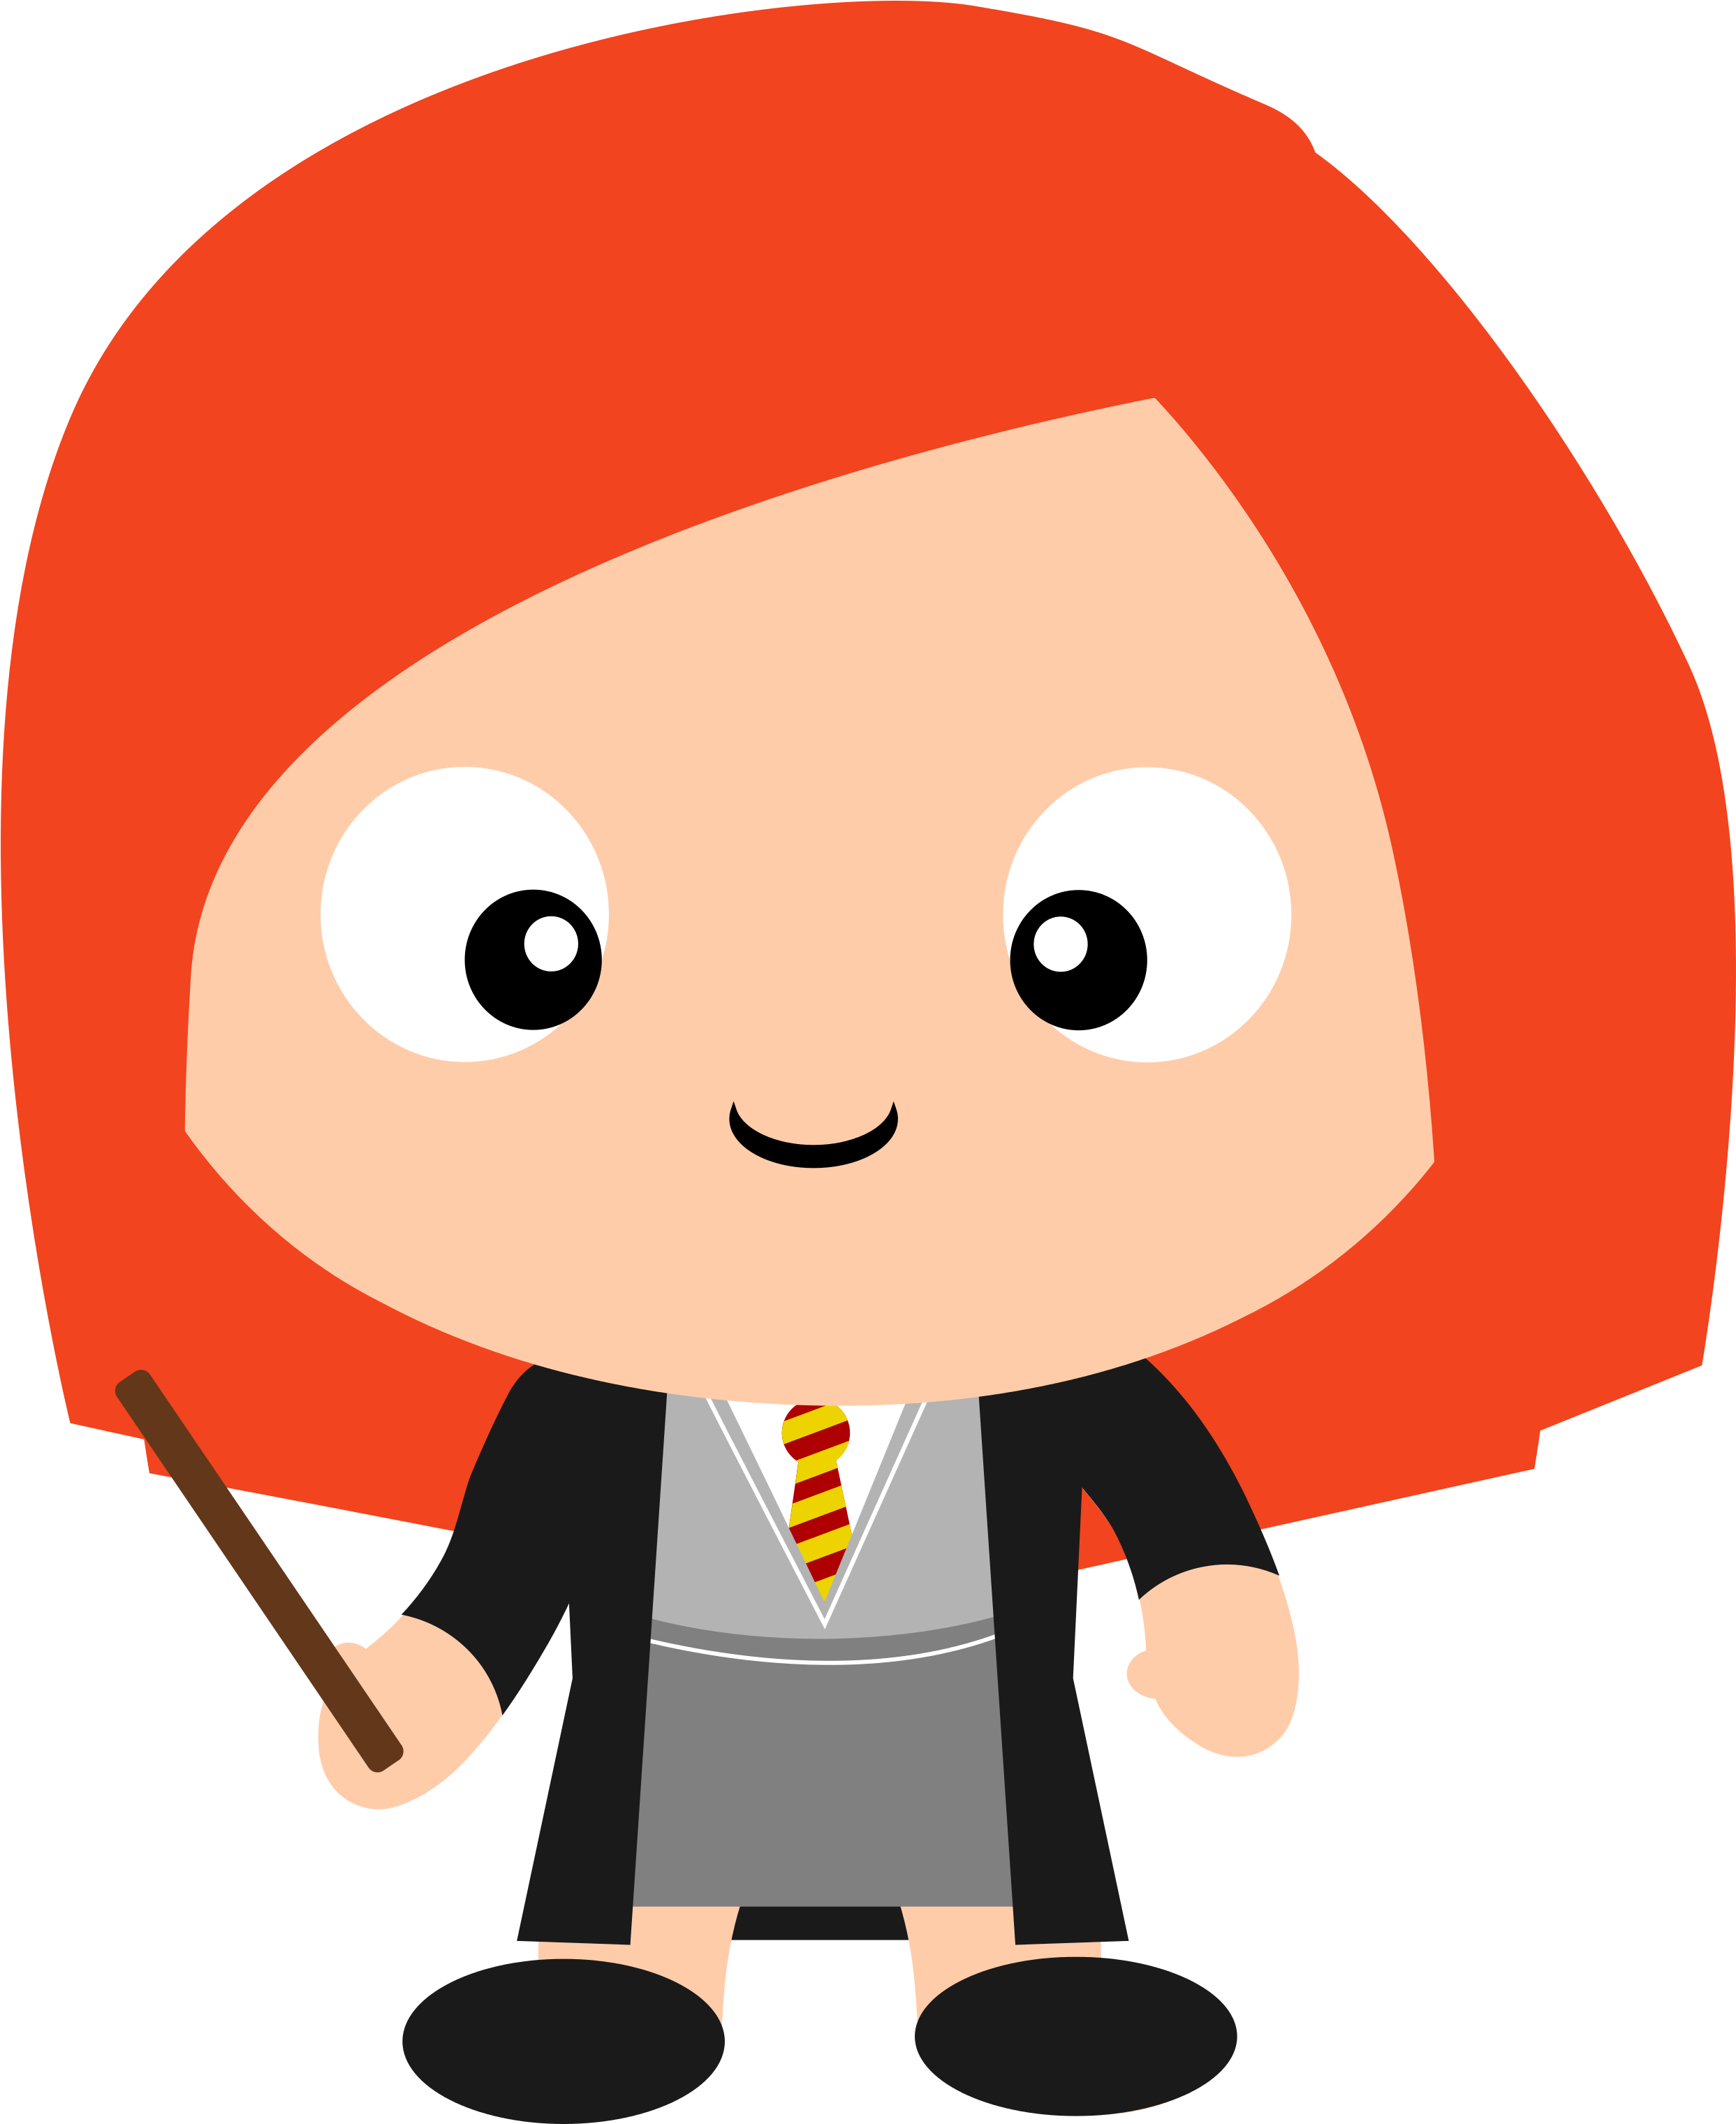 Ginny Weasley From Harry Potter - Harry Potter Clip Art (2550x3300)